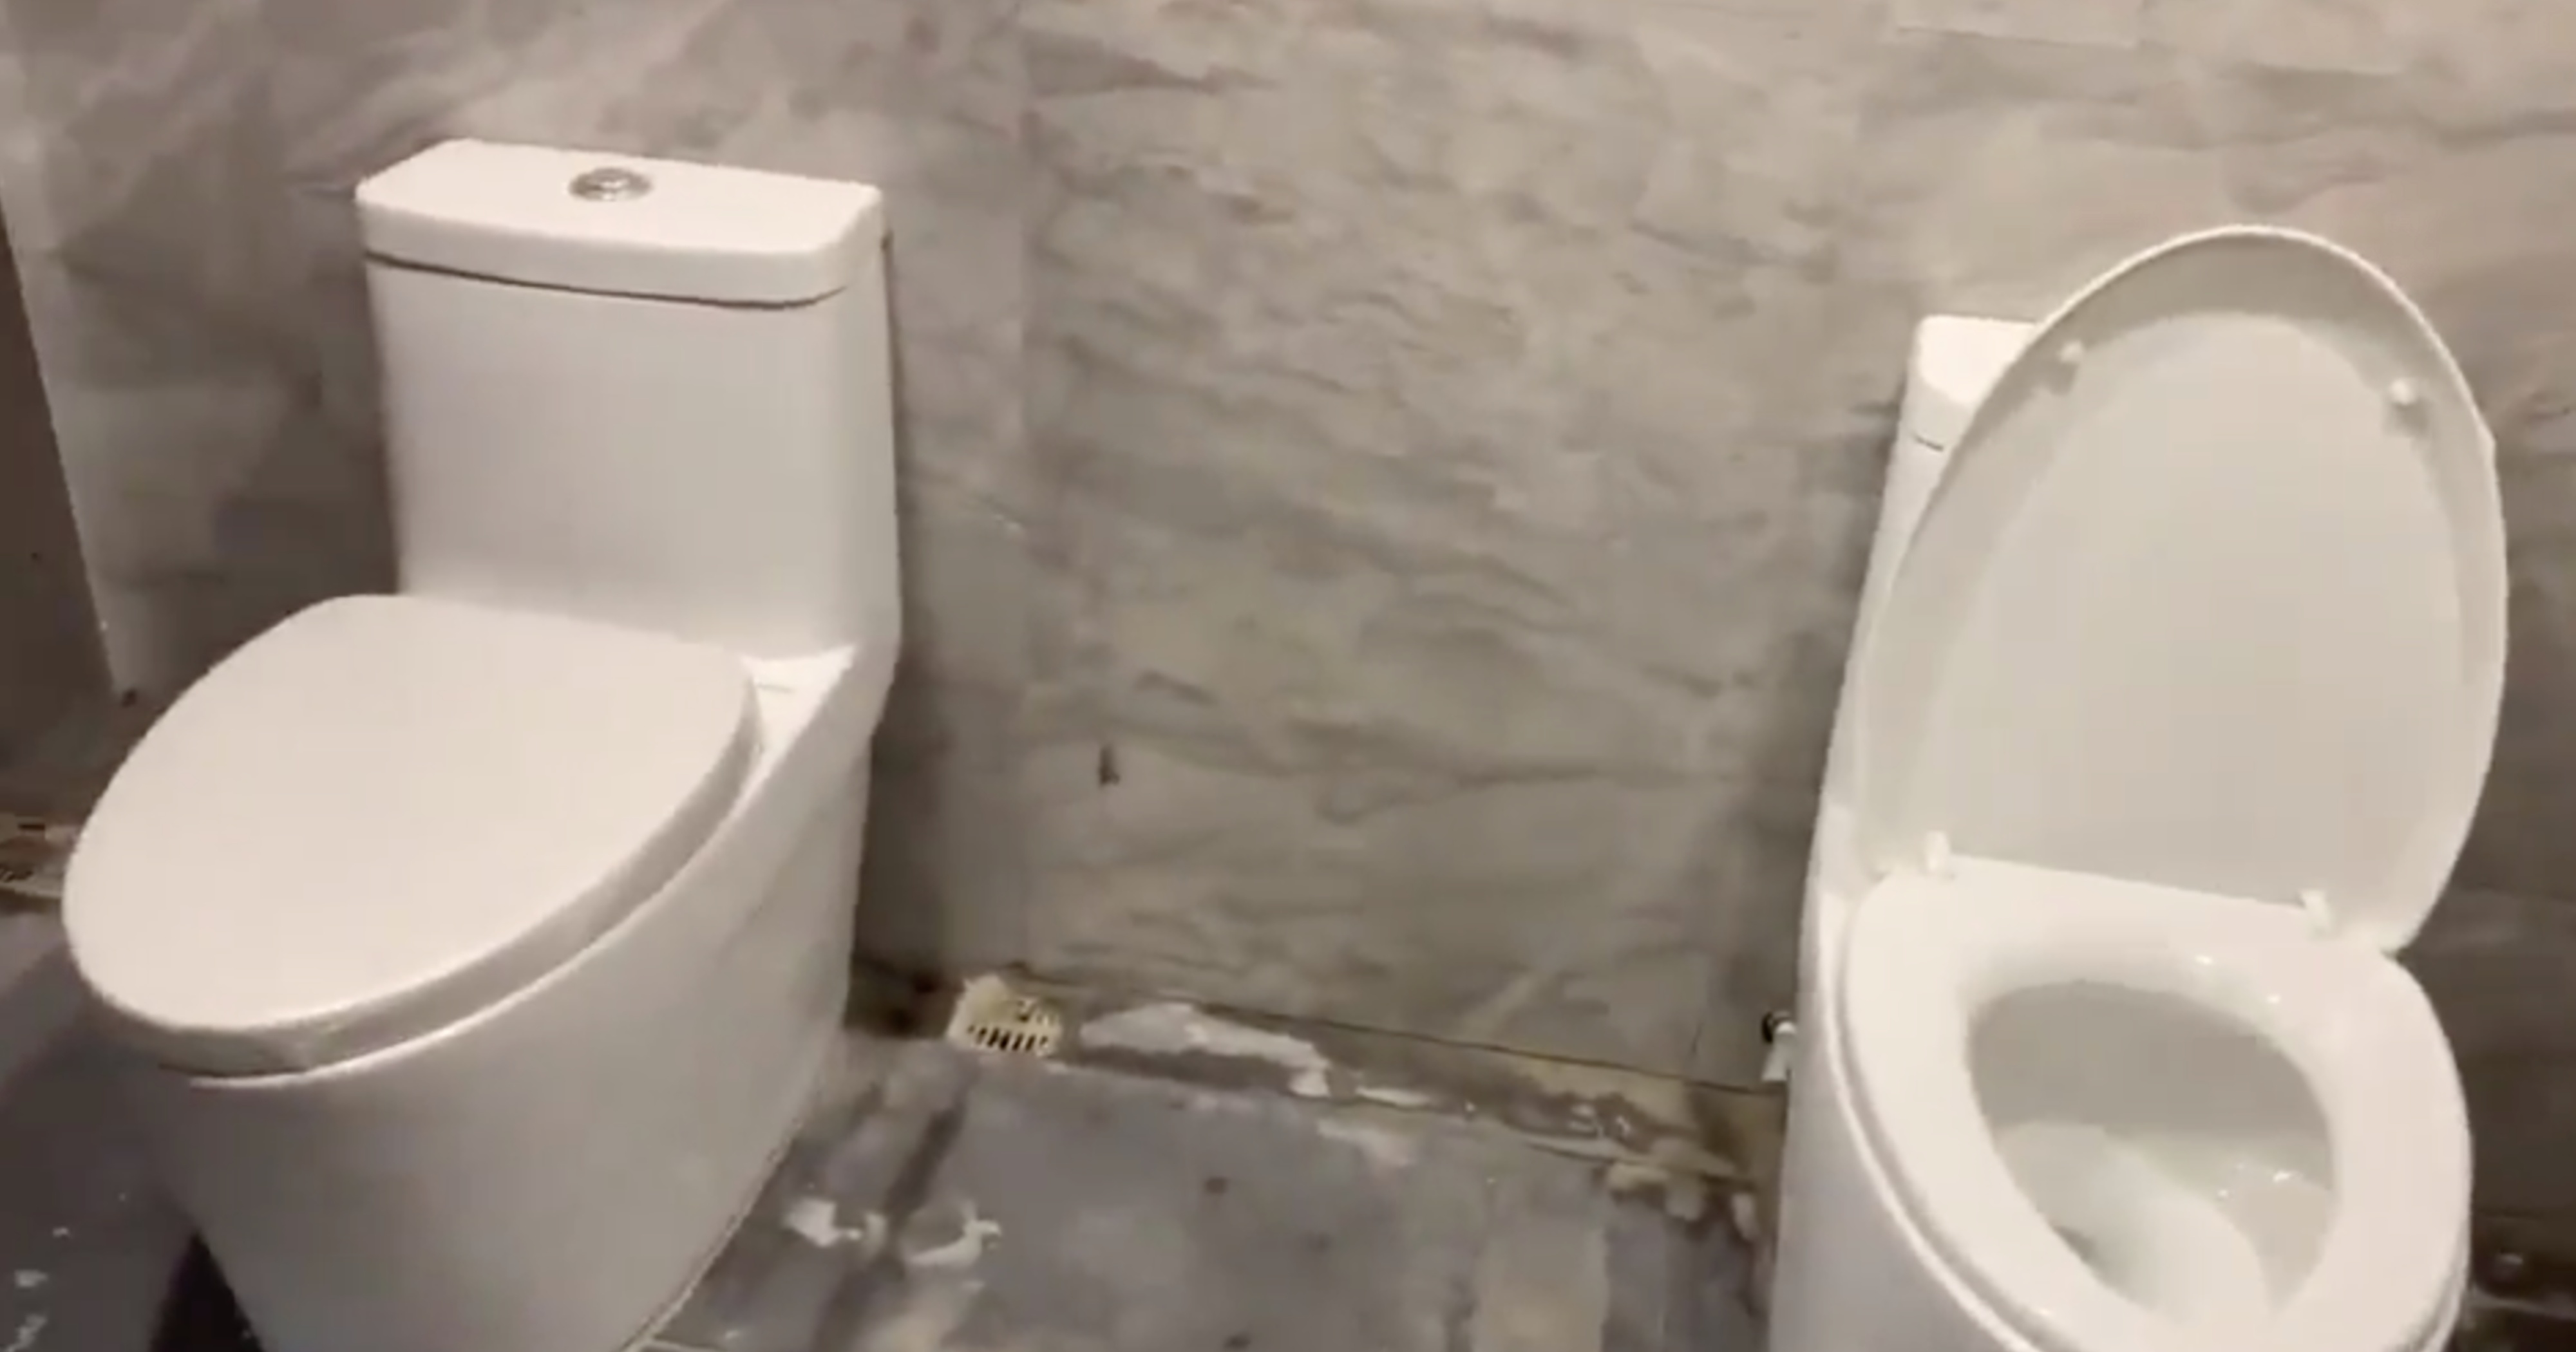 Sea Games 2019 takes teamwork to next level with 2 toilets in 1 cubicle